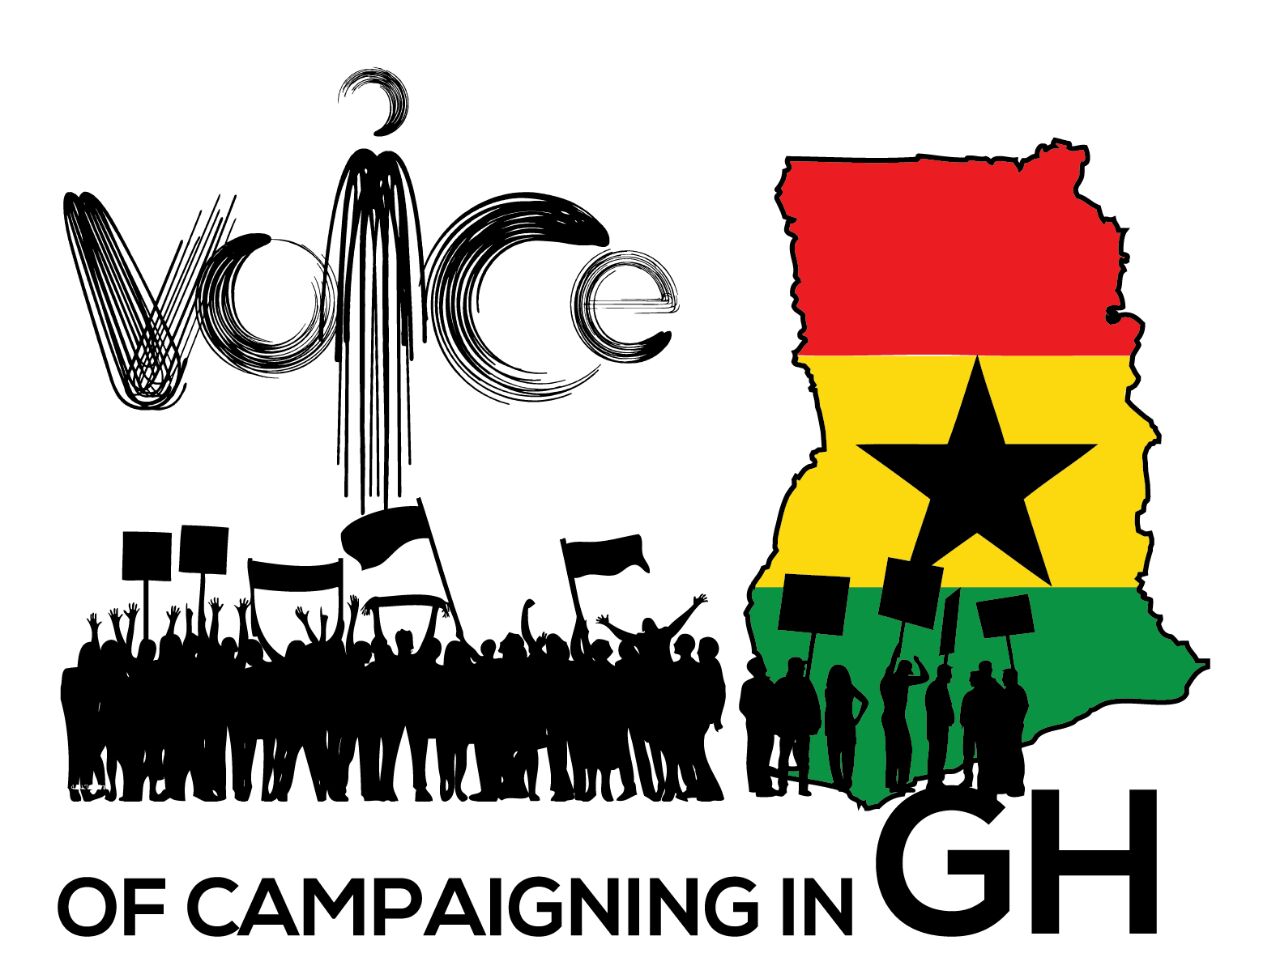 Paul Adom-Otchere’s ‘Voice of Campaigning in GH’ premiered